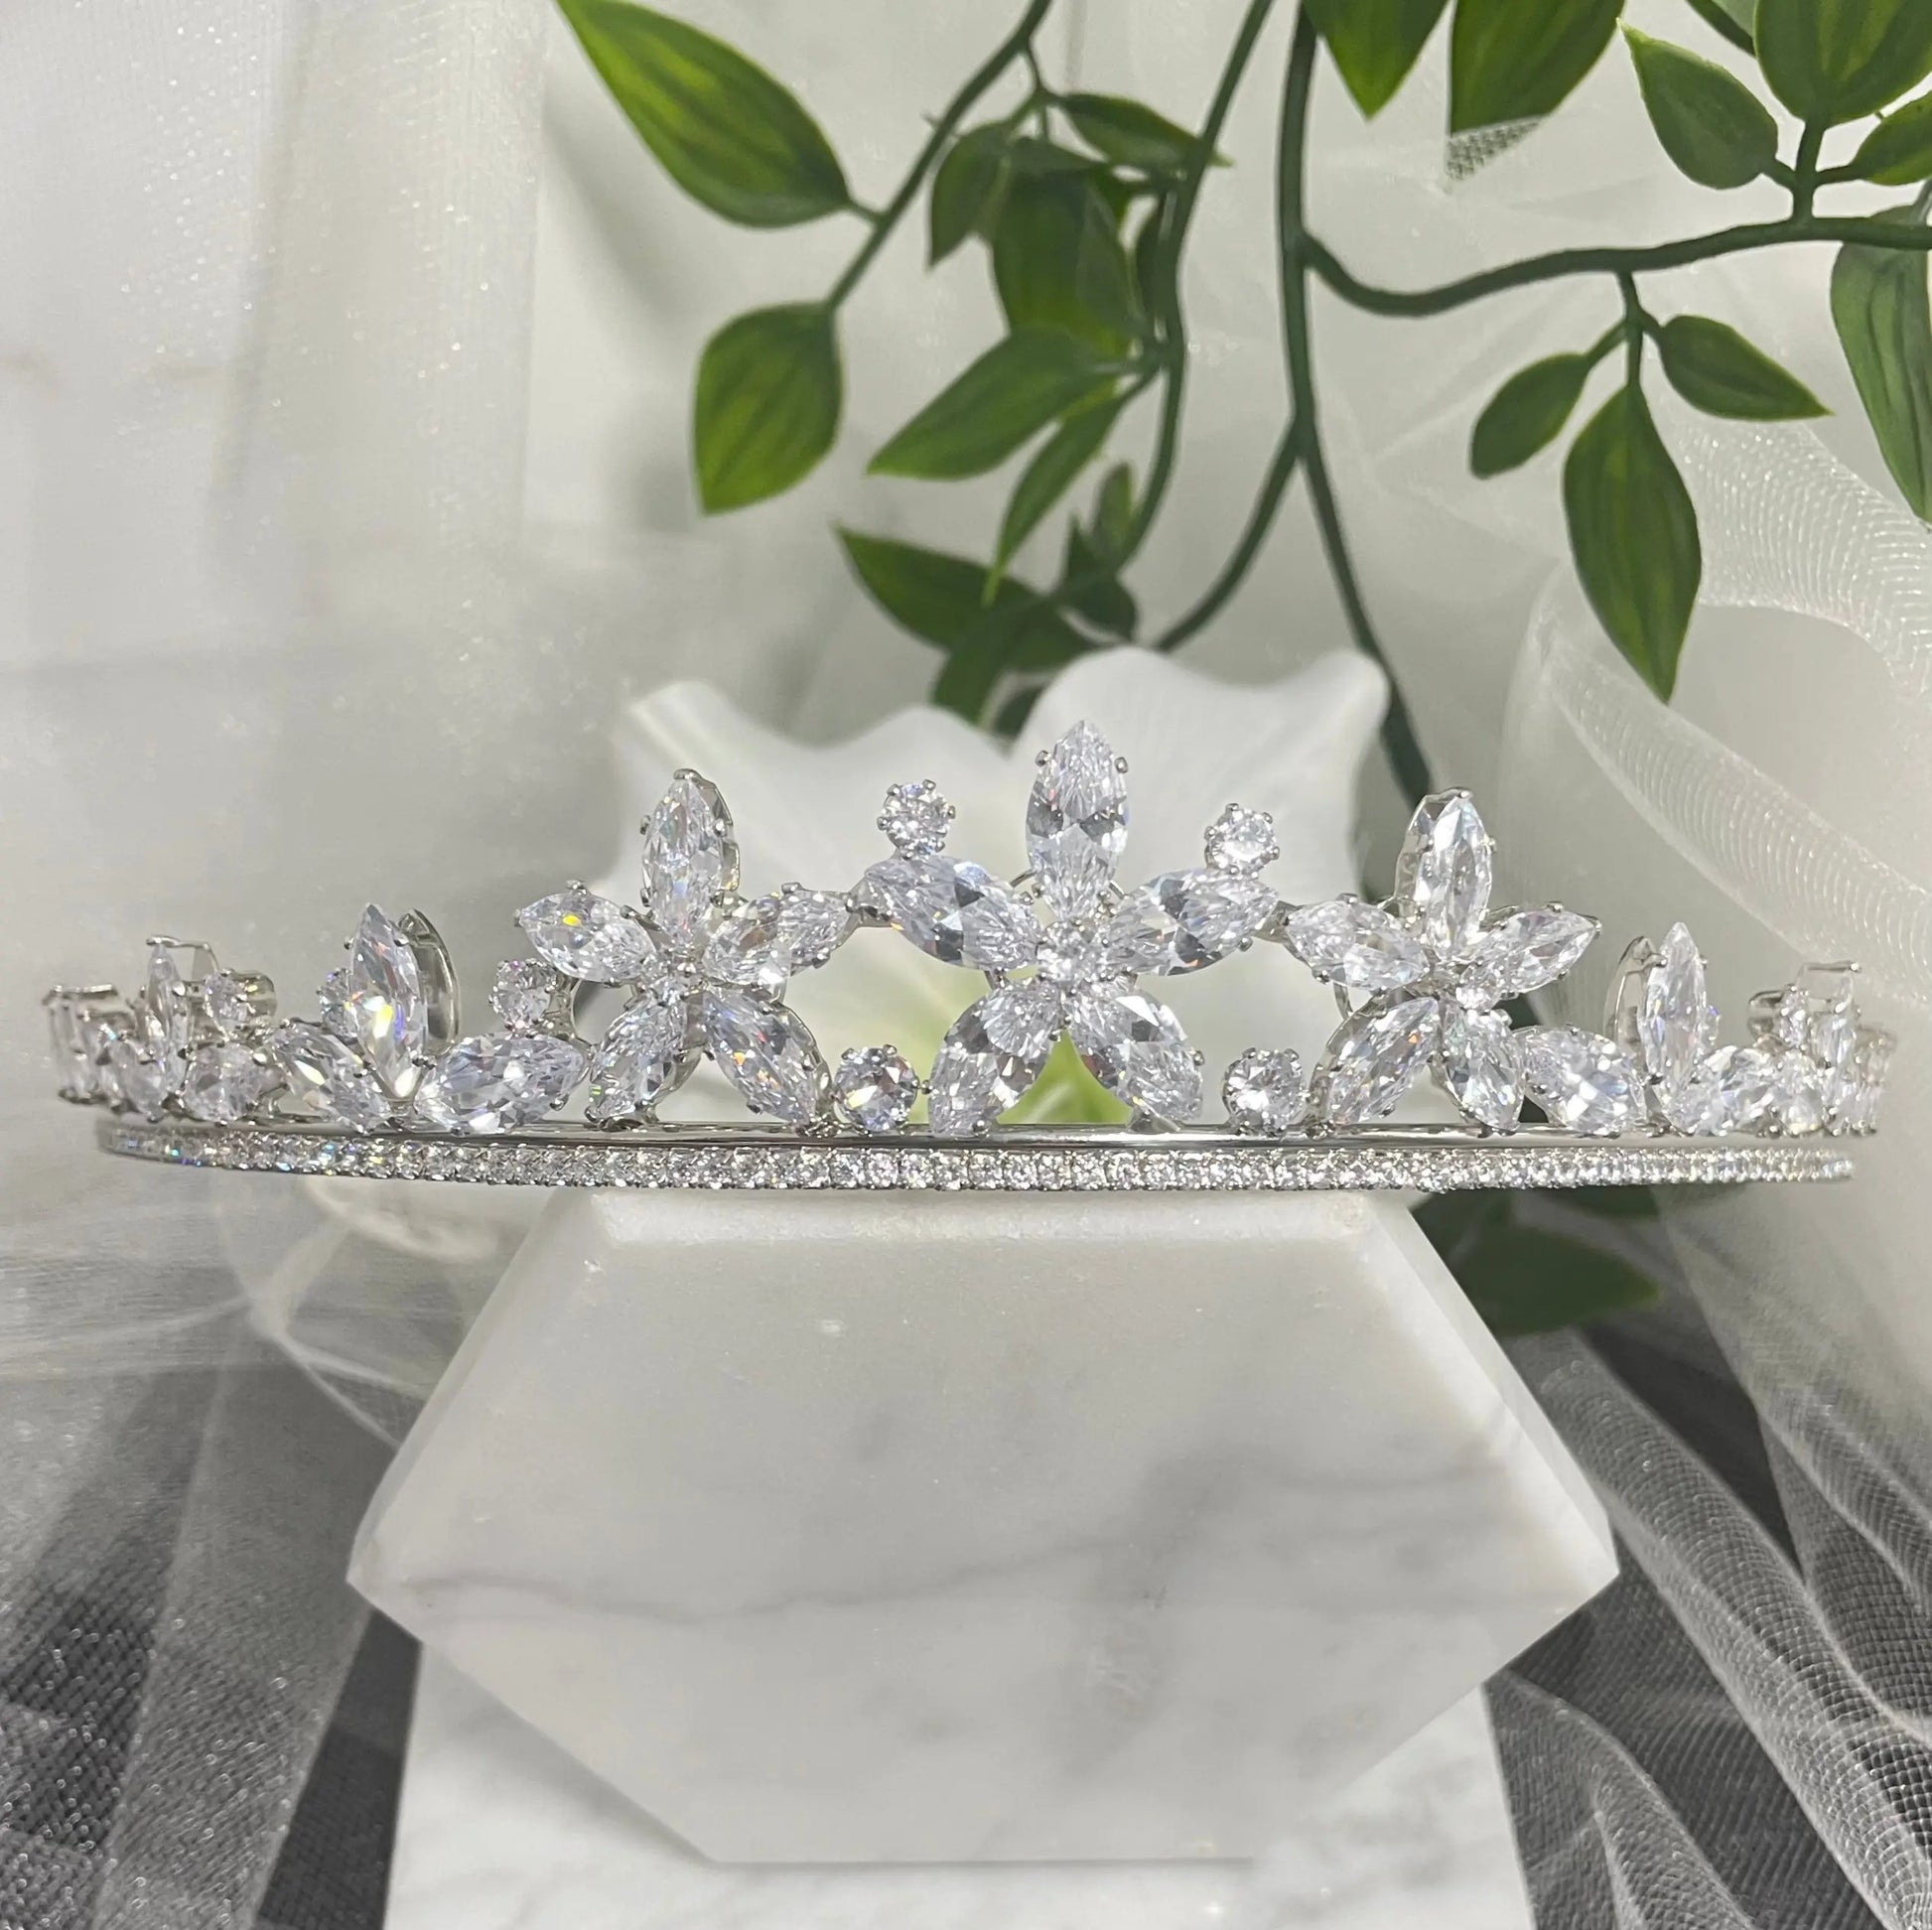 Katty Floral Crystal Headpiece Tiara, featuring elegant flower-like crystals and scattered CZs, perfect for adding a touch of regal elegance to any special occasion outfit.